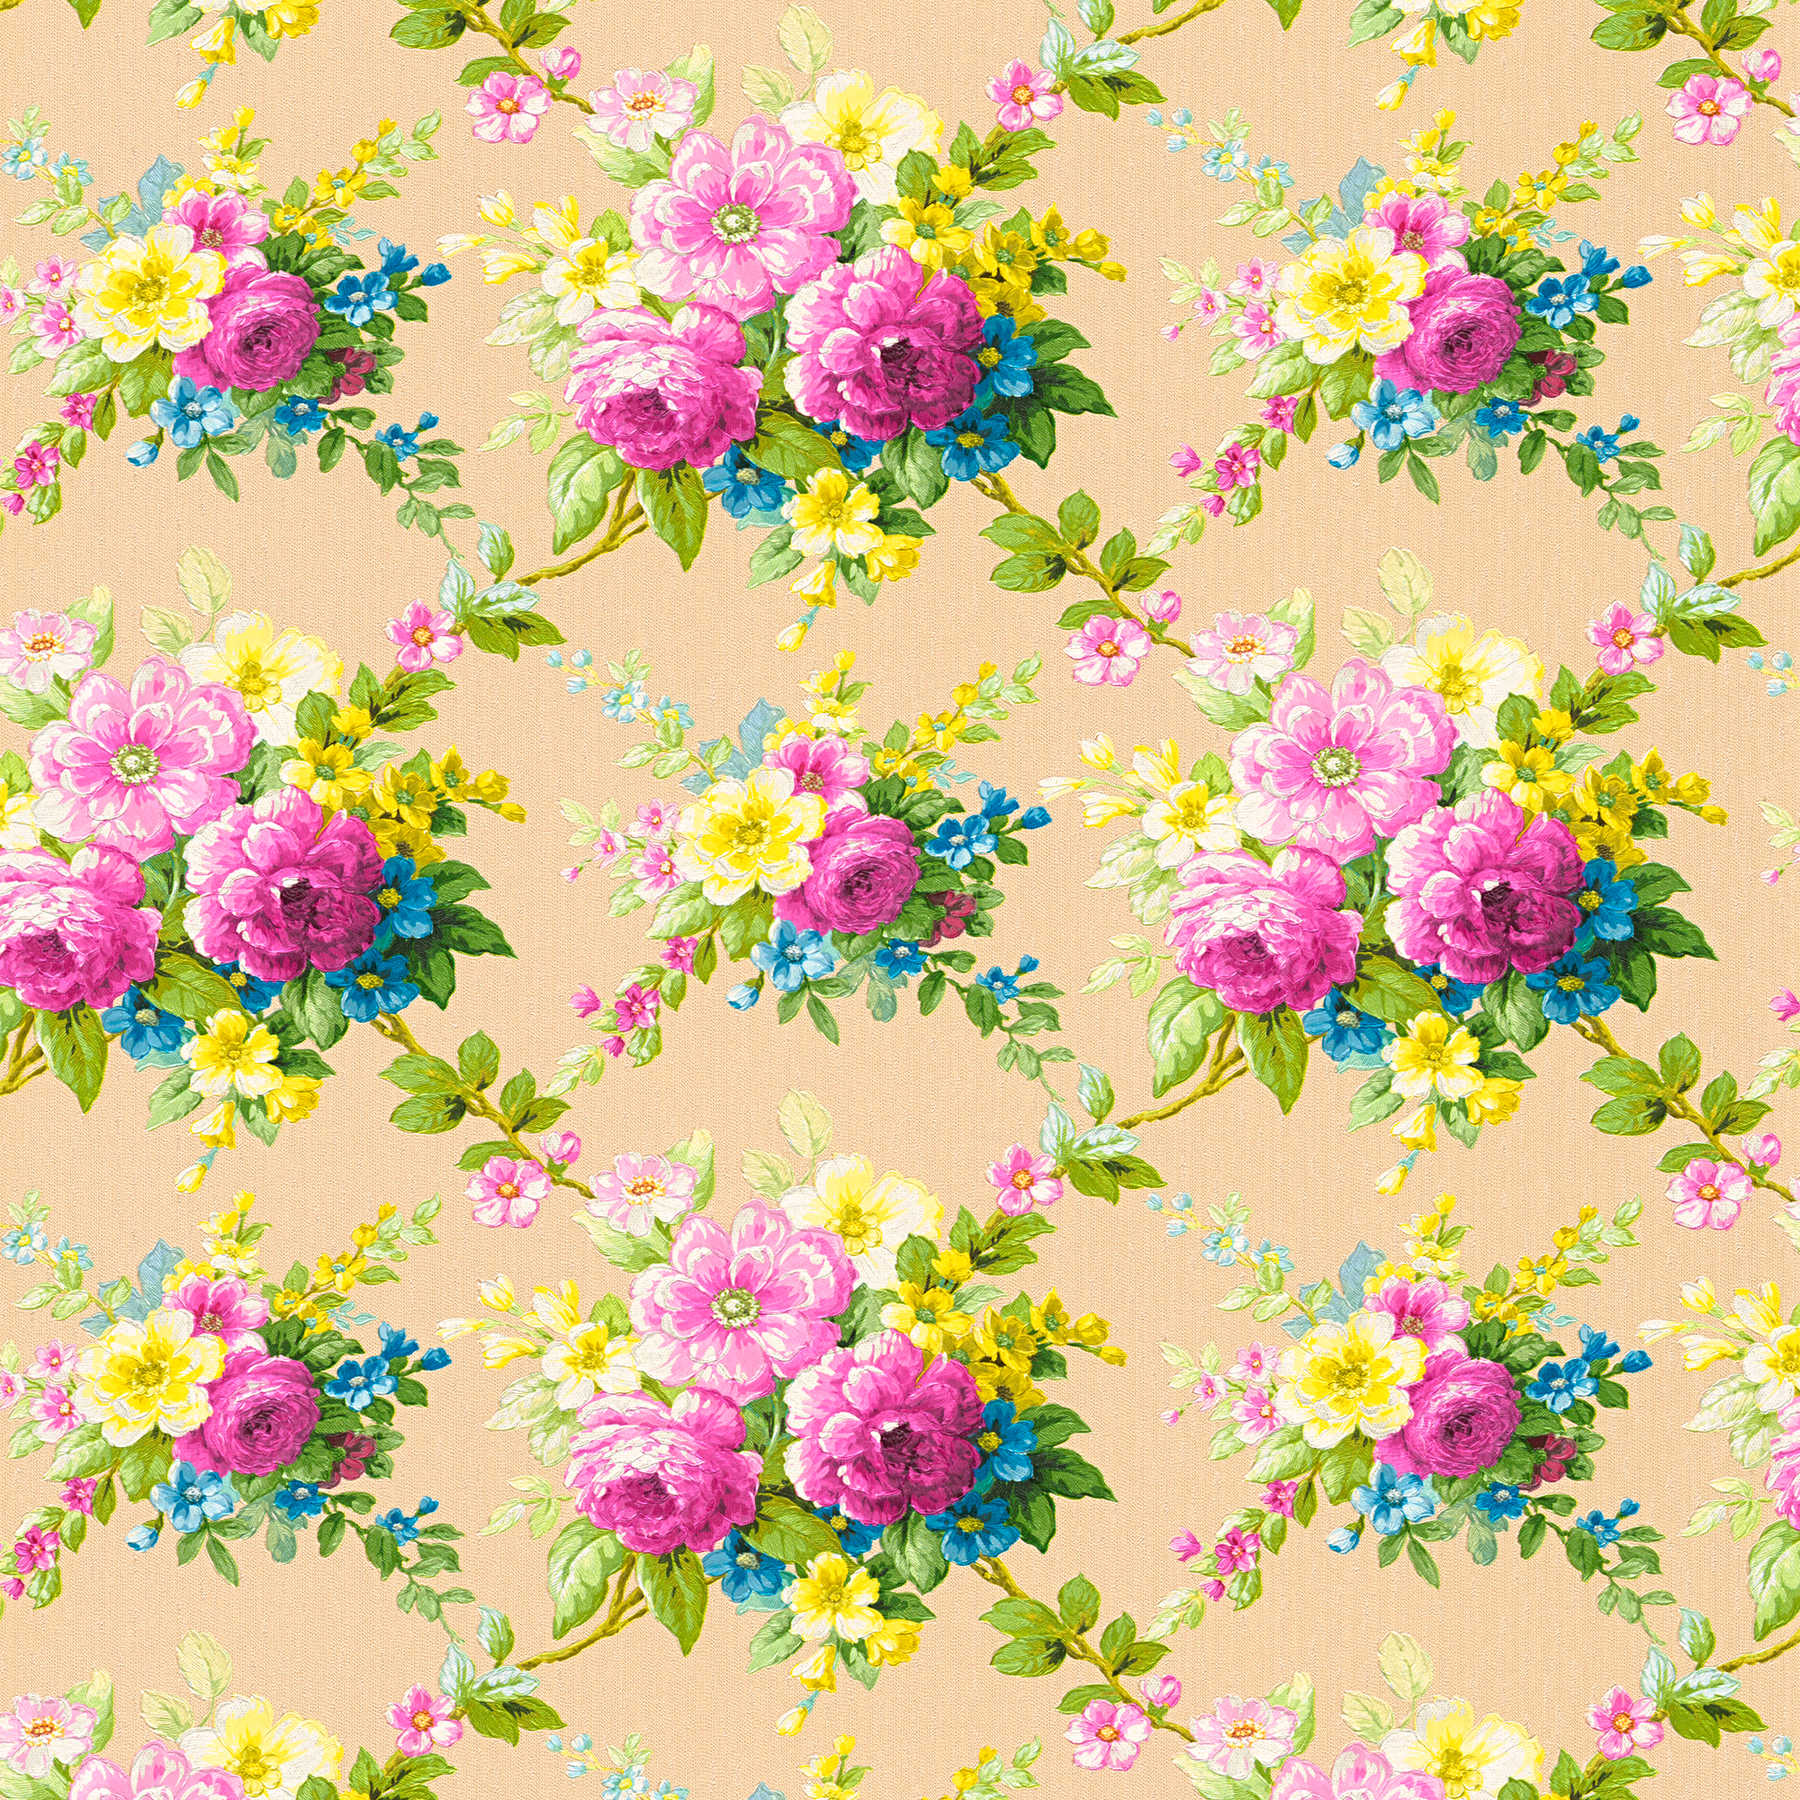 Wallpaper Flowers Decor floral ornament with metallic effect - multicoloured
